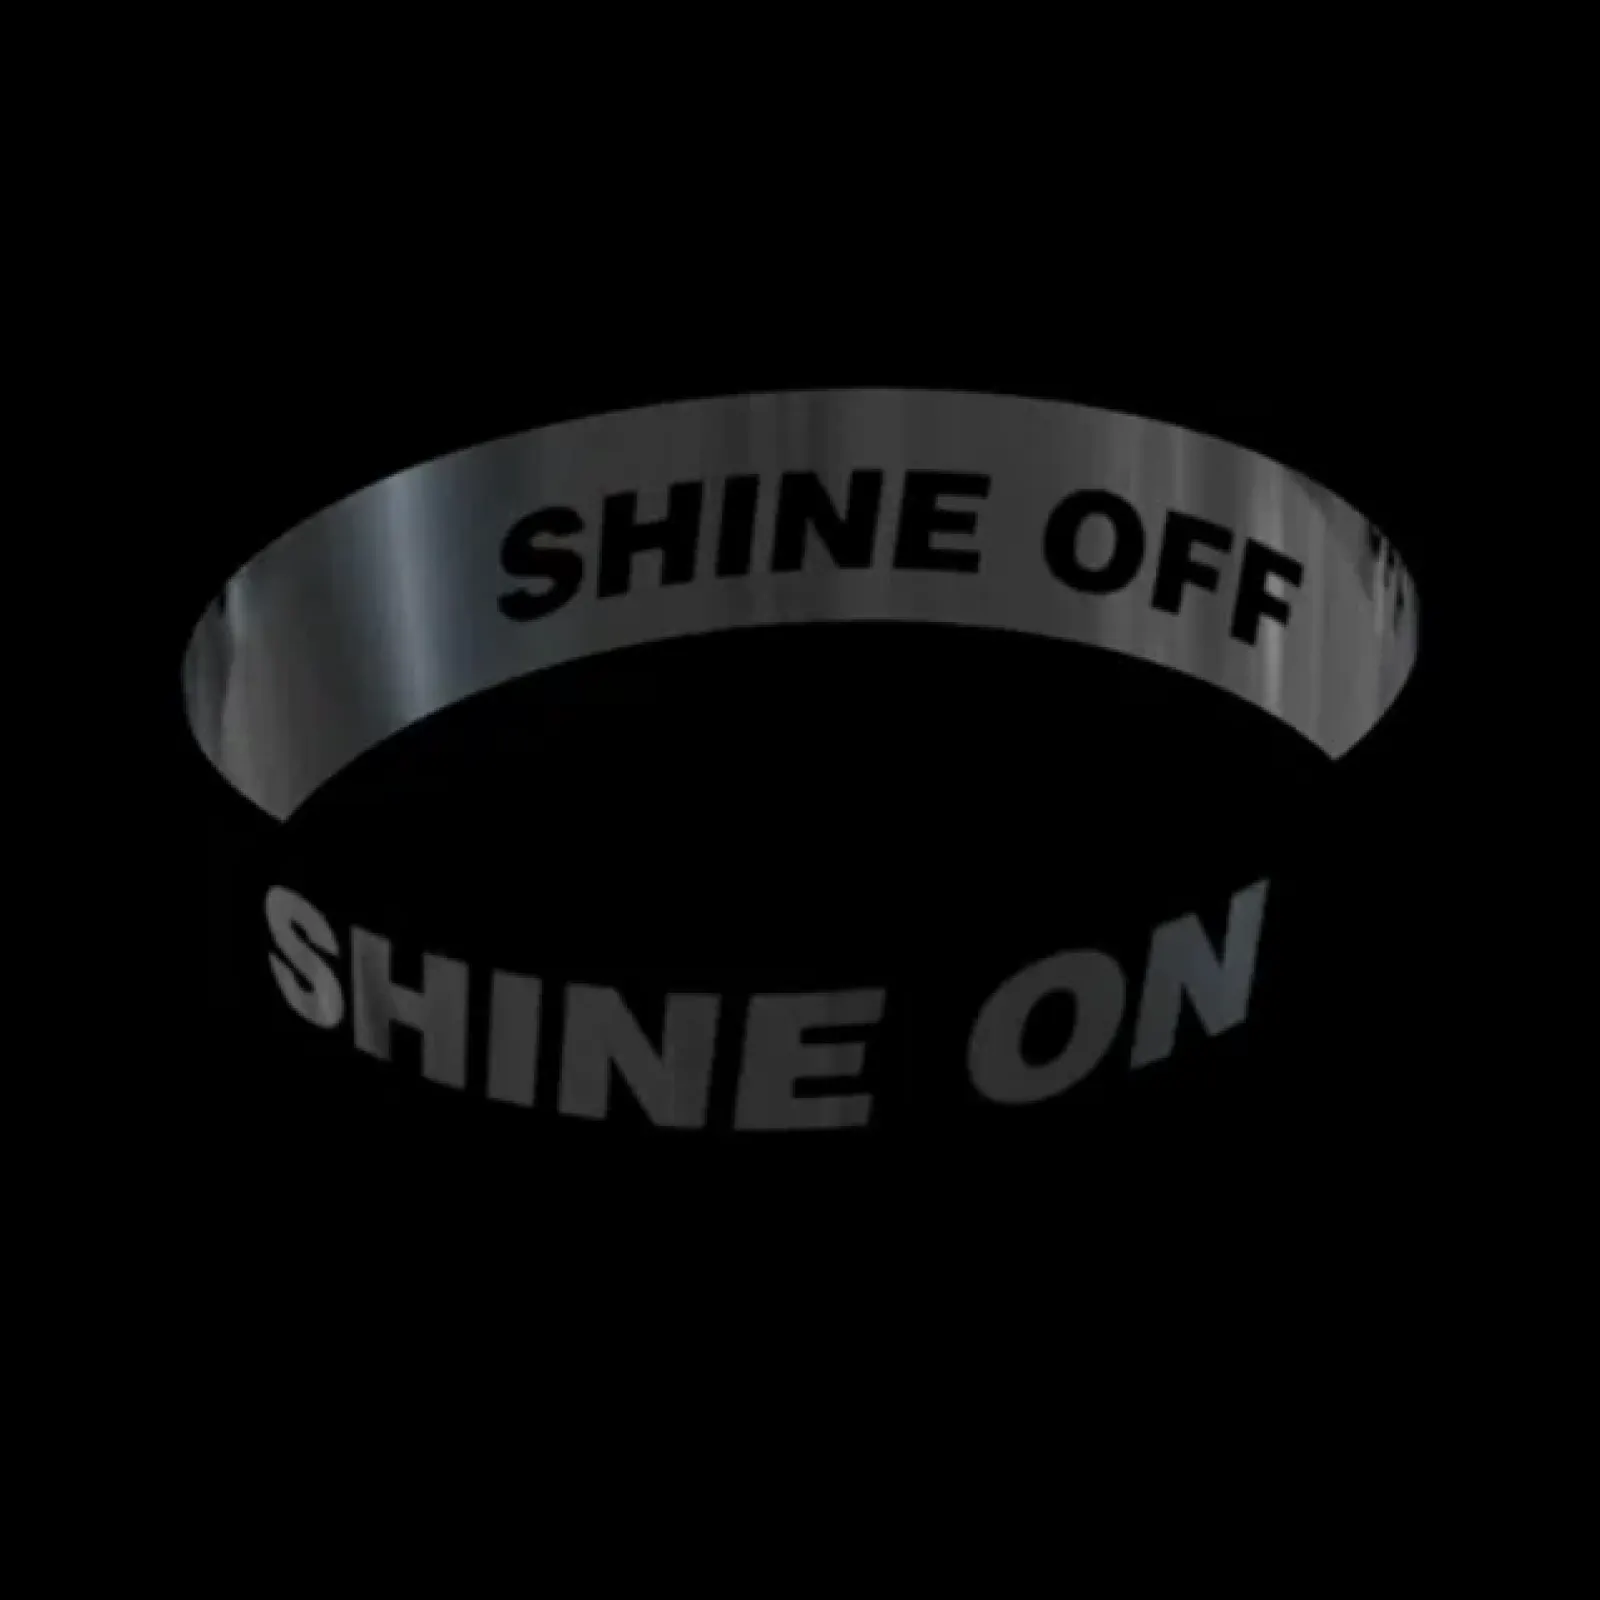 Black and silver rotating banner with text "Shine On" -Building Teams: An Ever-Evolving Orchestra